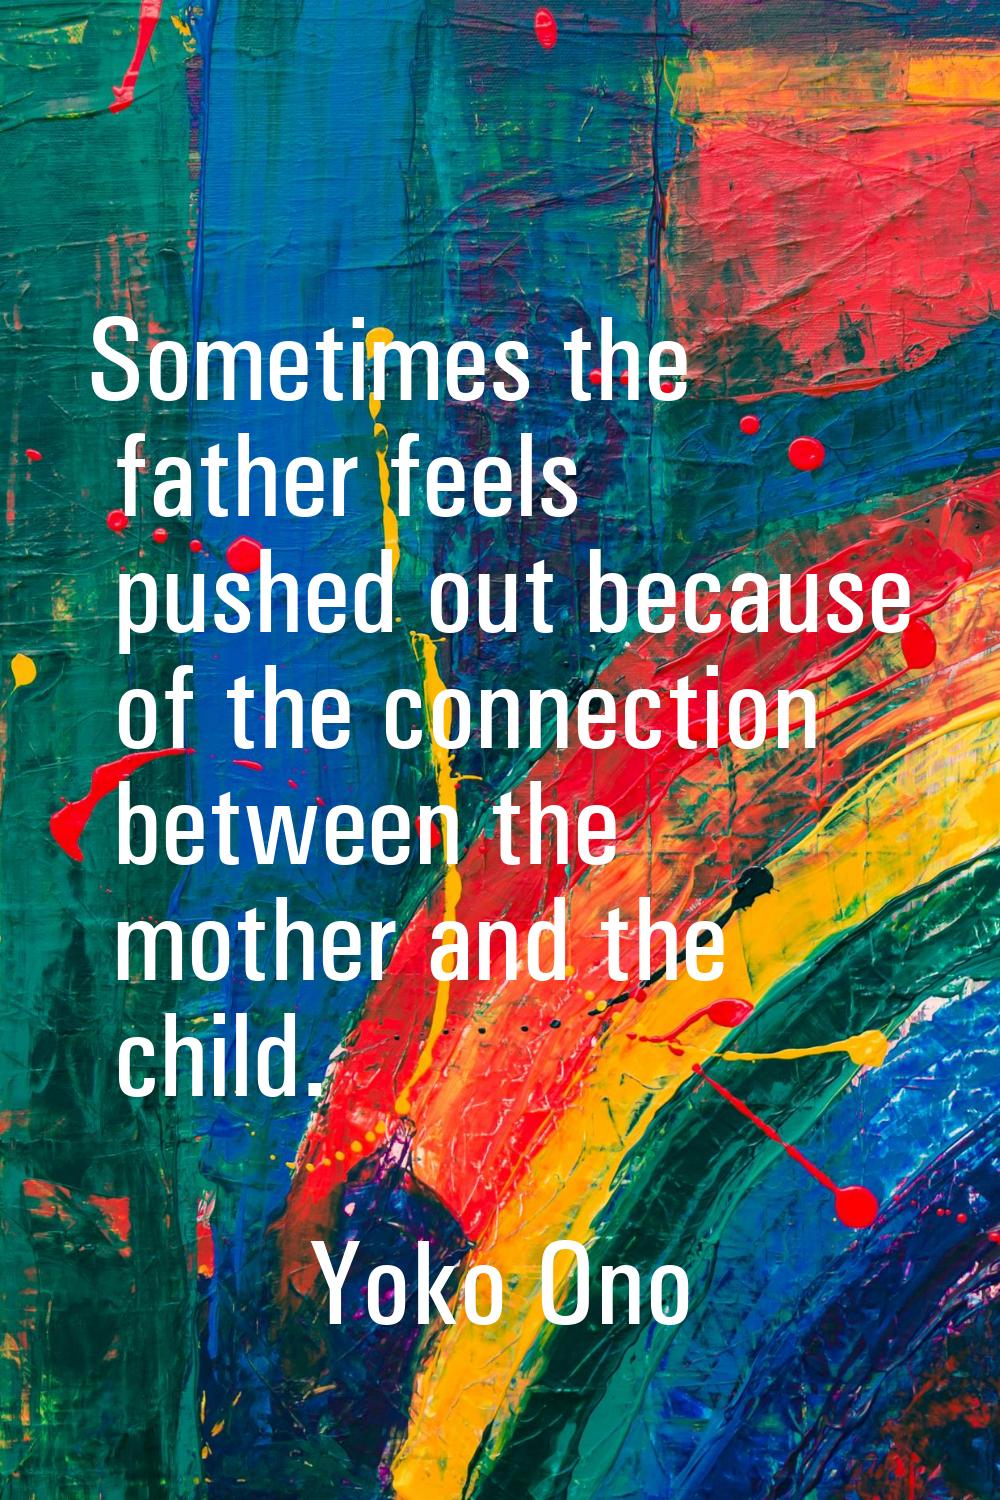 Sometimes the father feels pushed out because of the connection between the mother and the child.